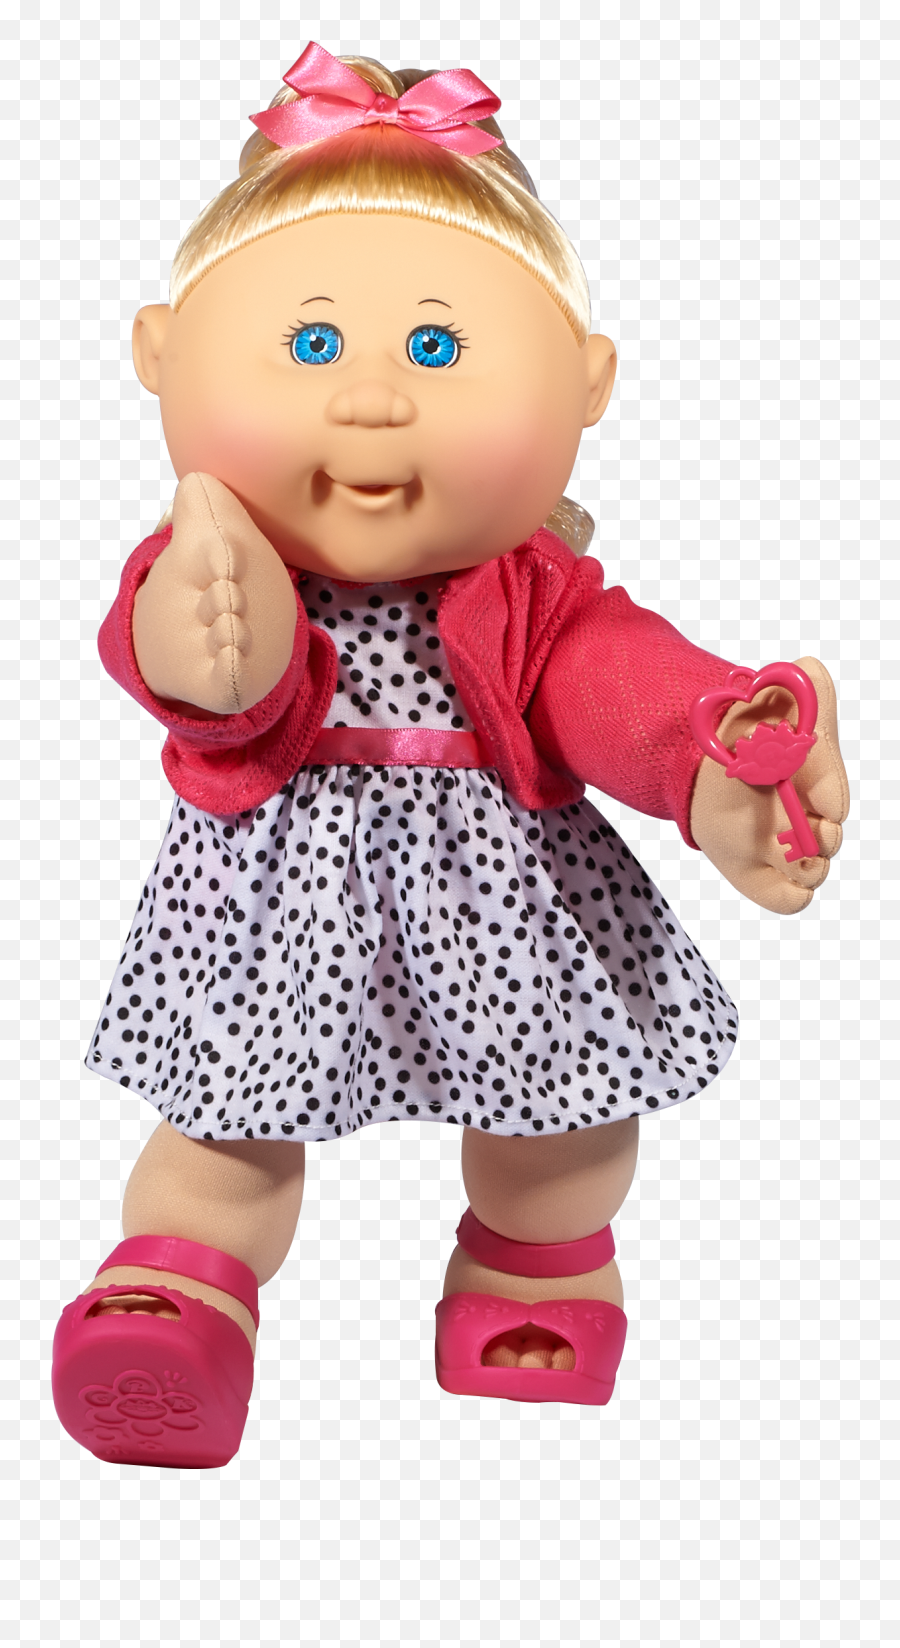 Interactive Cabbage Patch Doll Cheap - Cabbage Patch Kids Emoji,Cabbage Patch Kids Logo